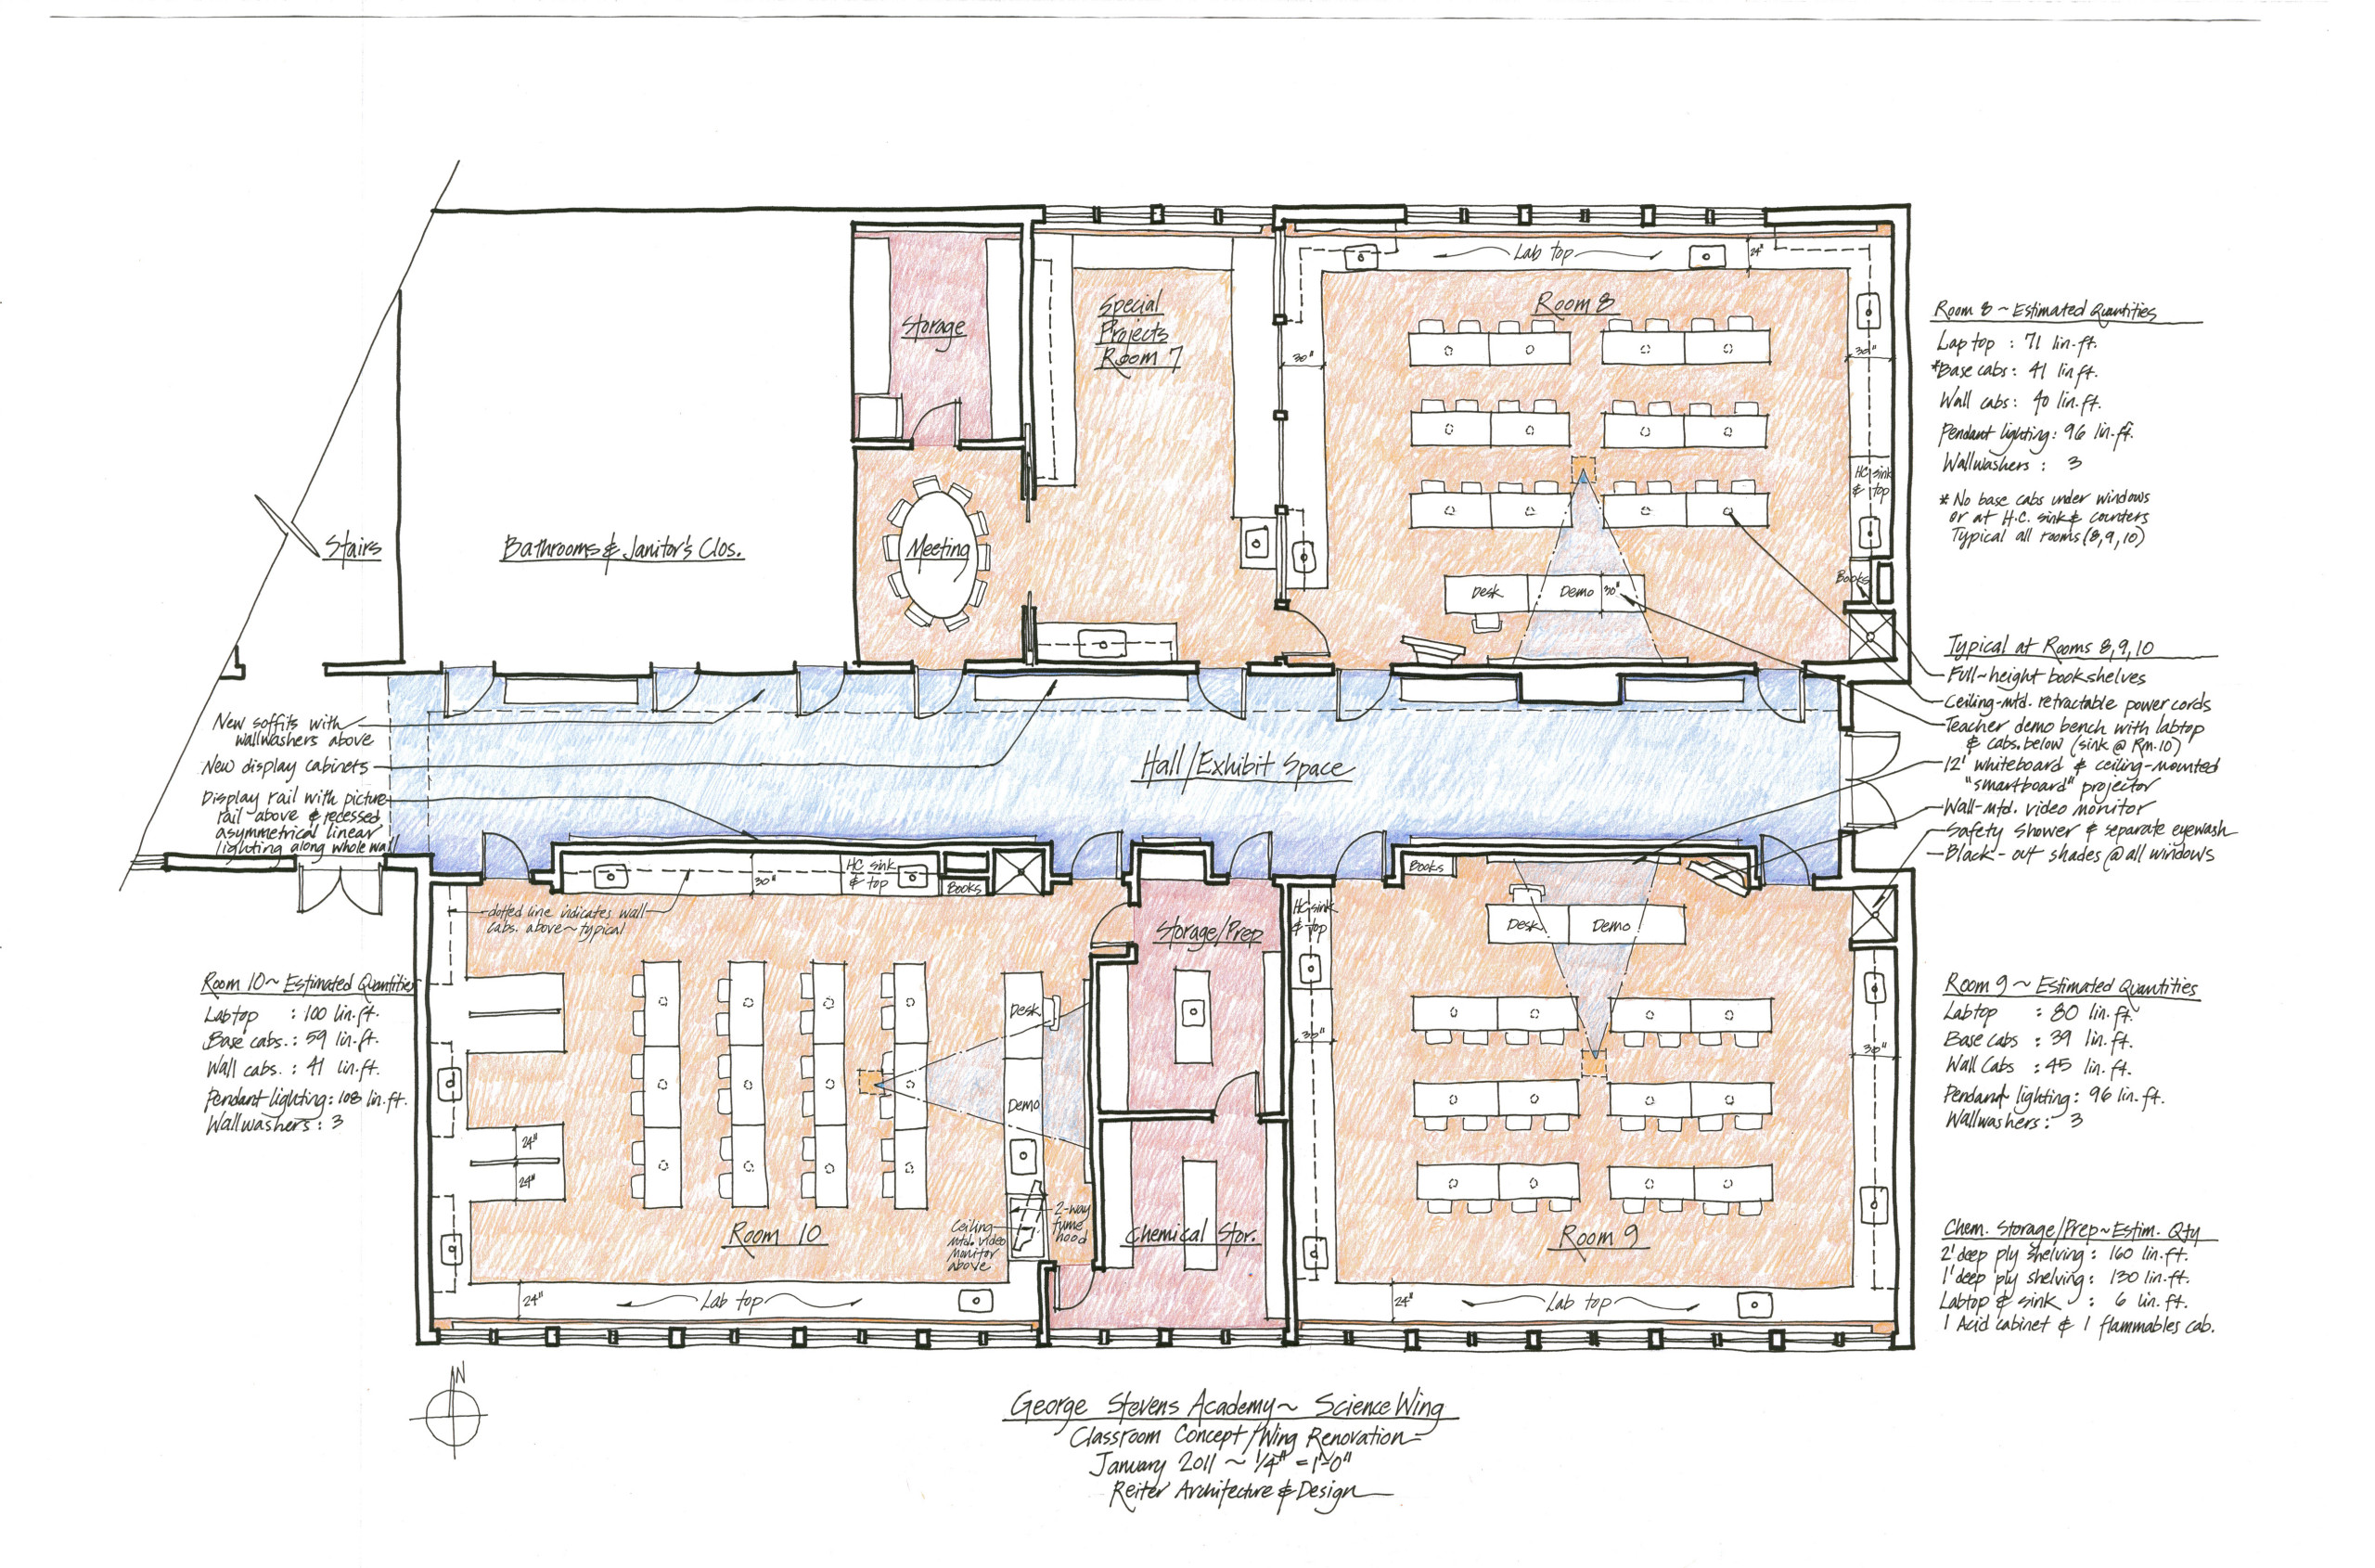 George Stevens Academy: Science Wing Renovation Master Plan